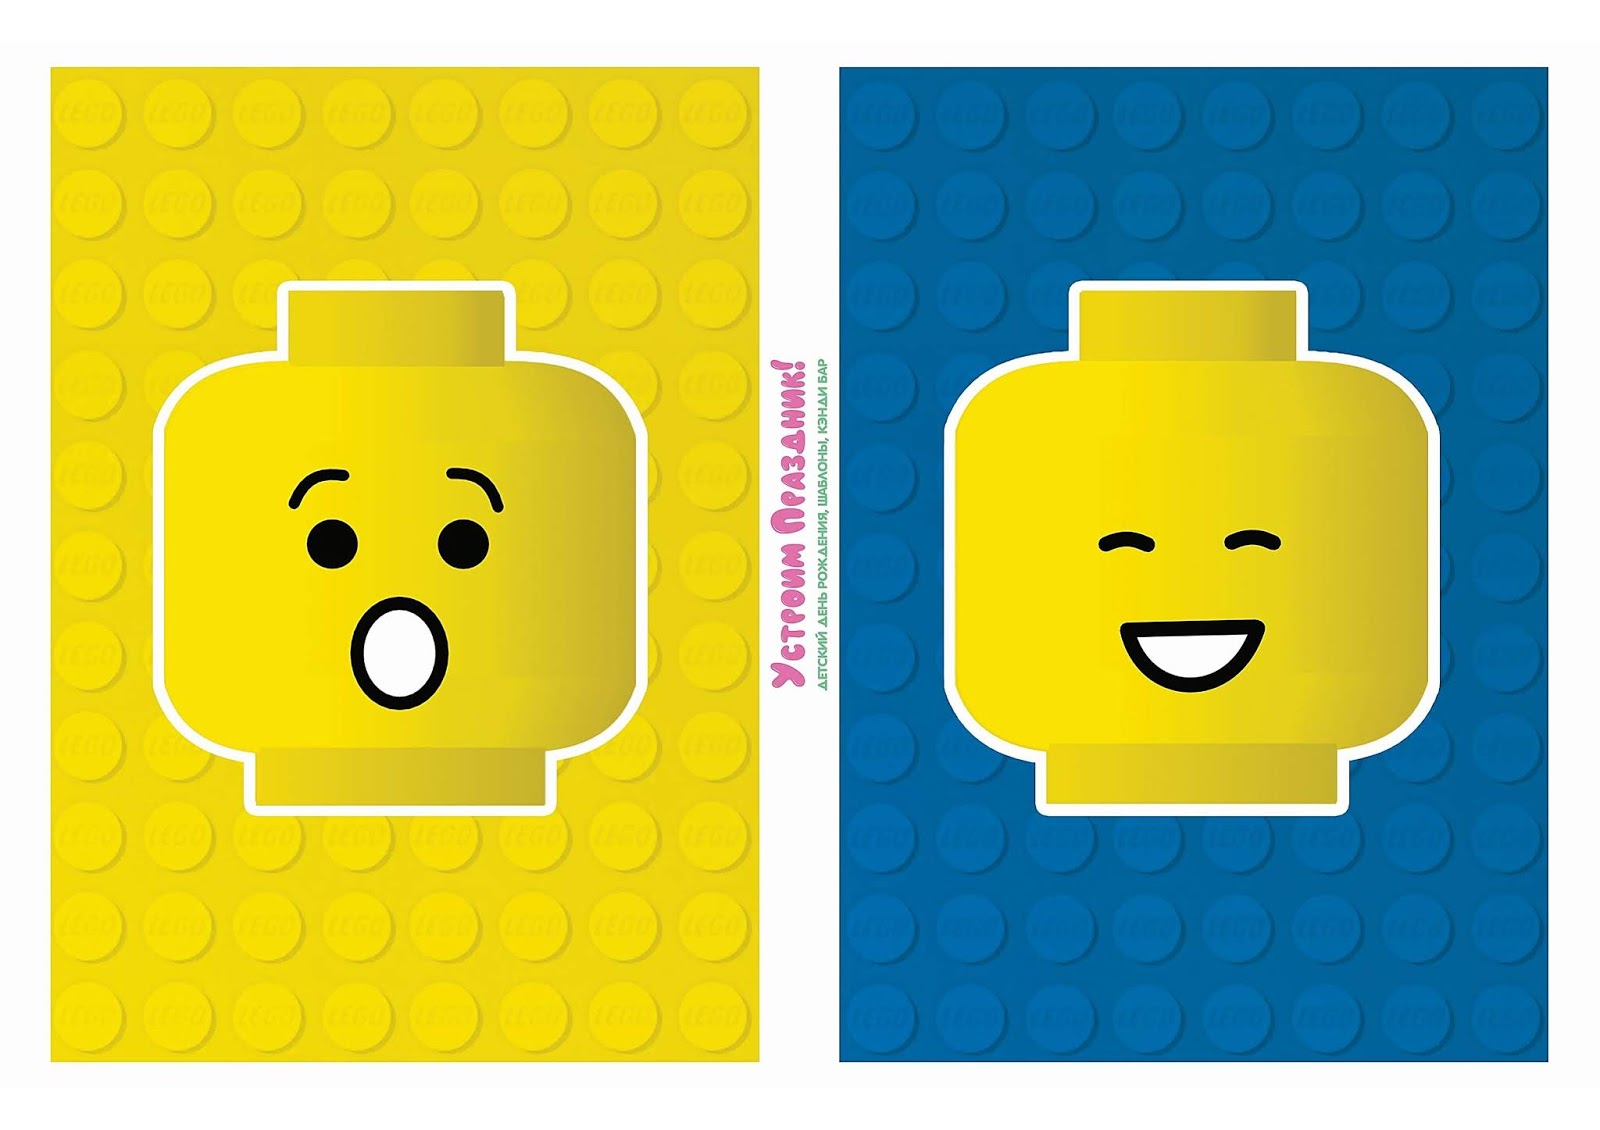 free-printable-banners-with-lego-faces-oh-my-fiesta-for-geeks